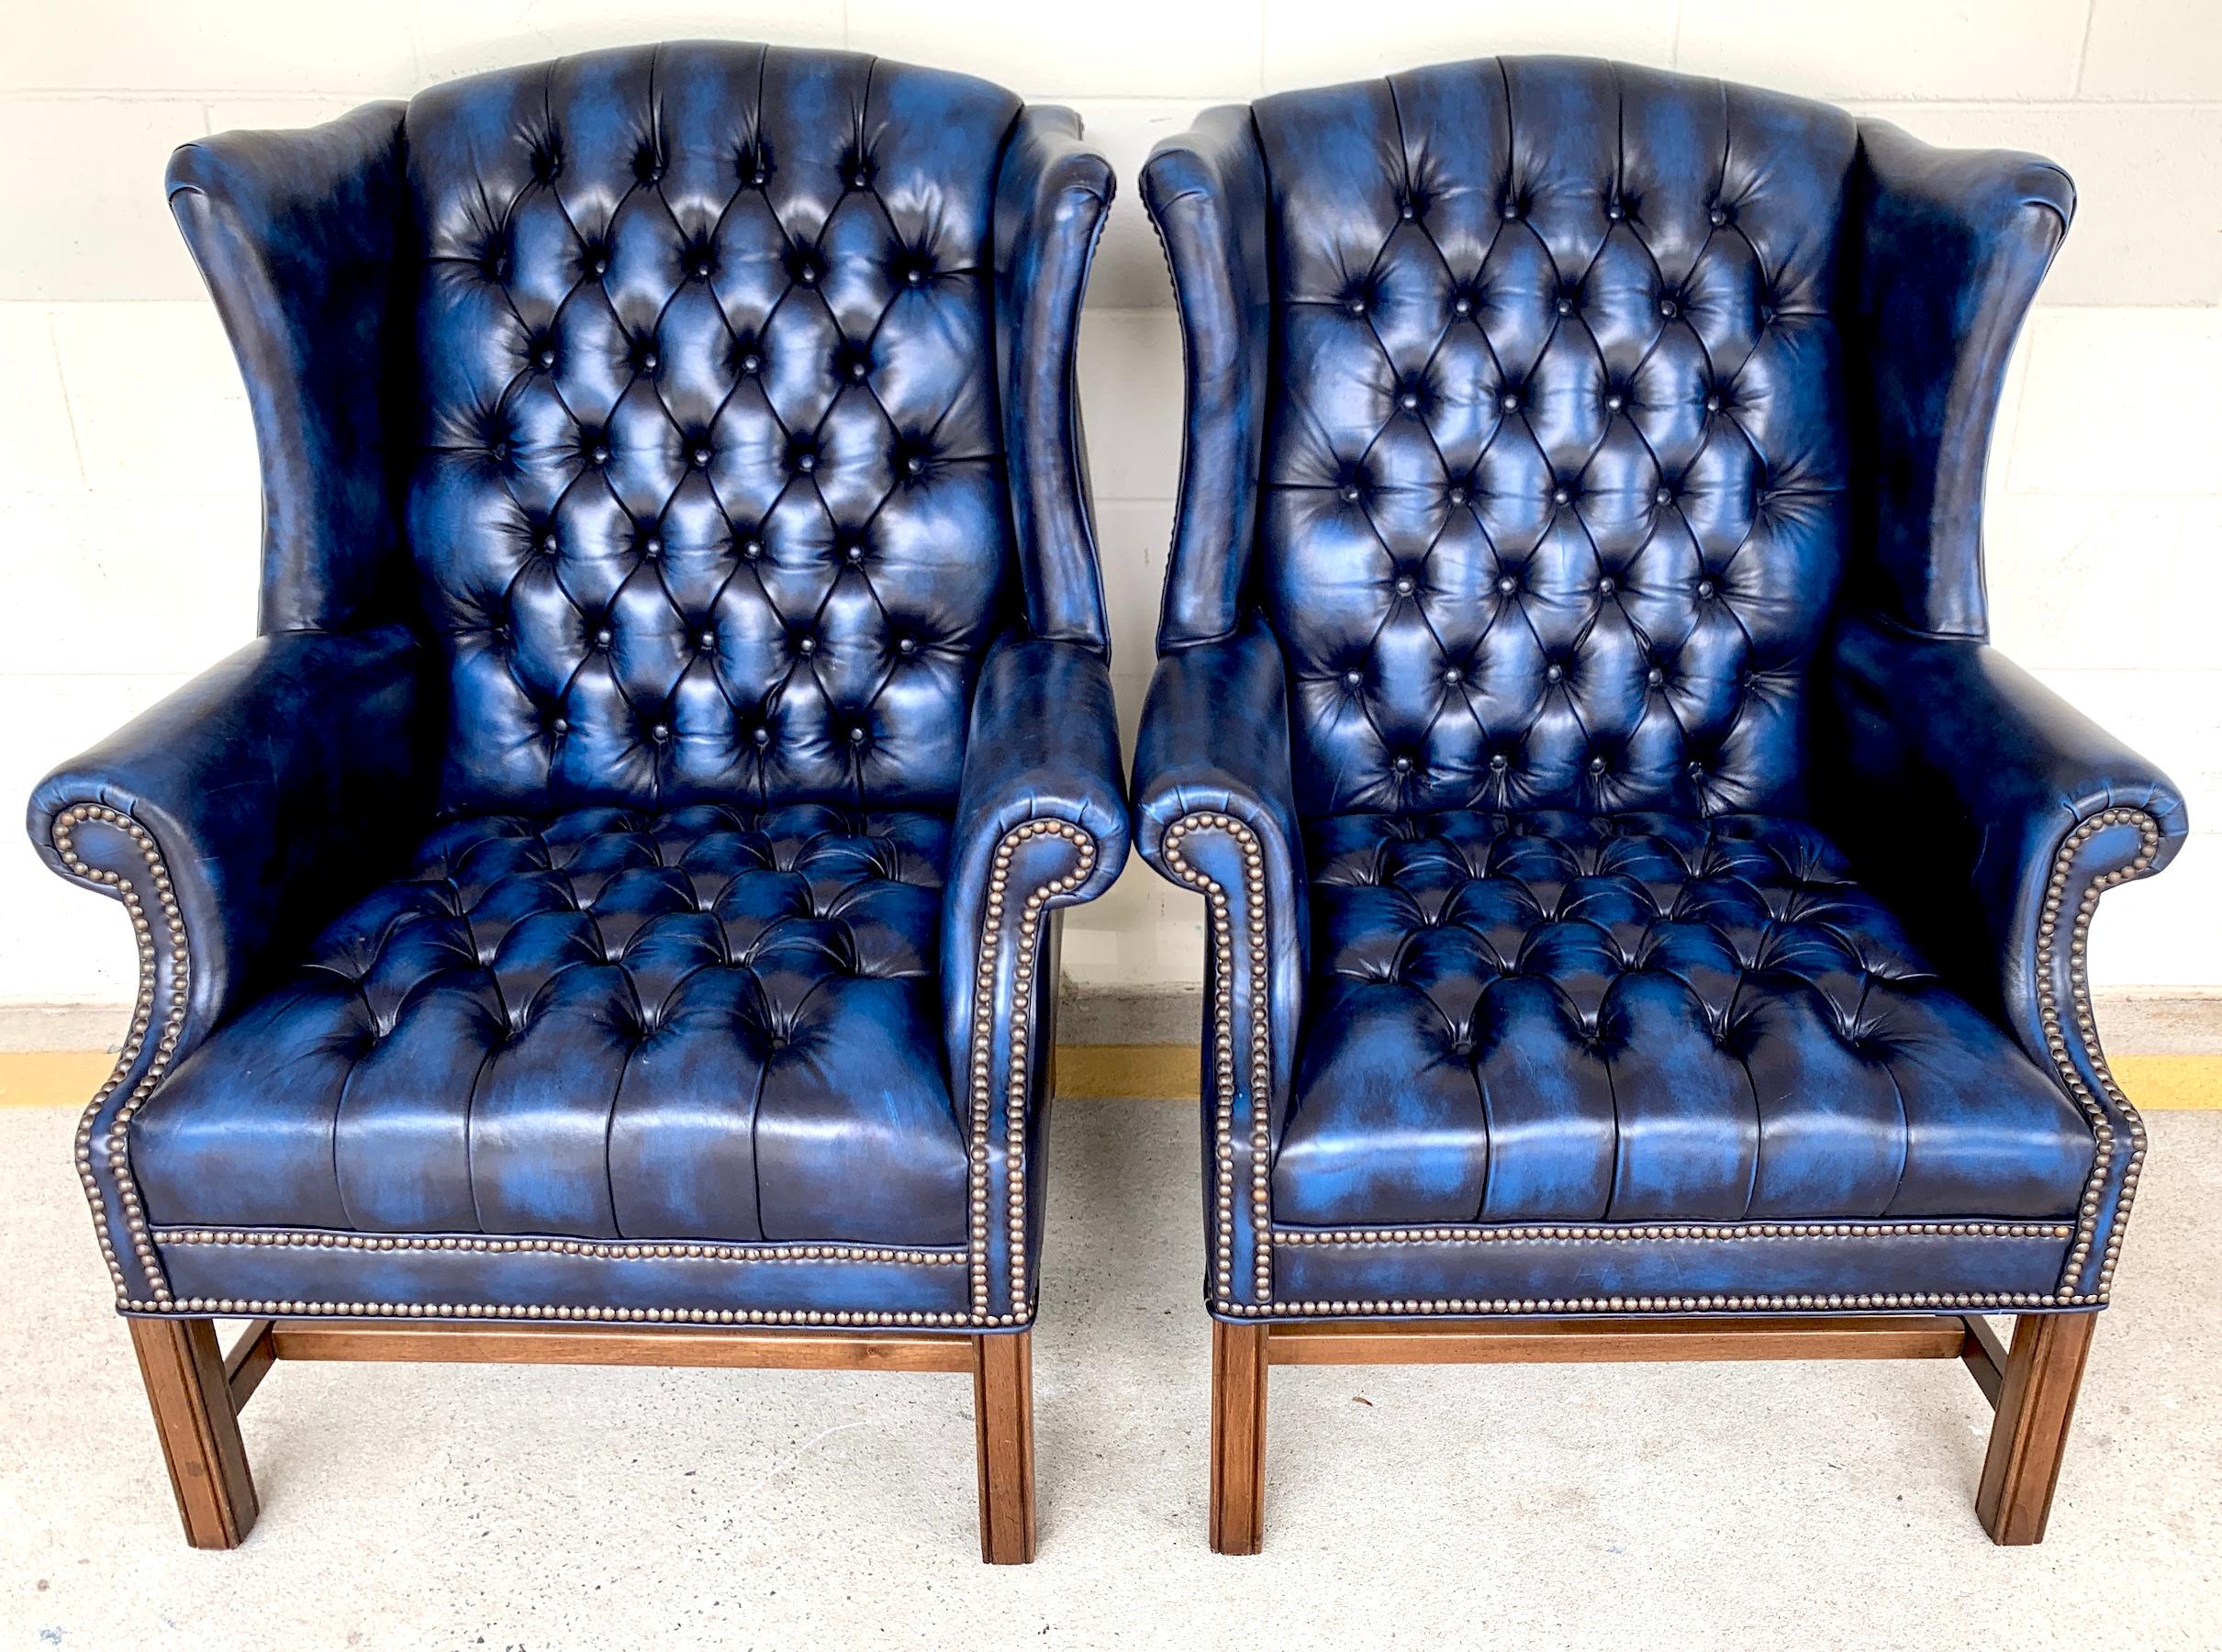 Pair of English Hollywood Regency blue leather wing back Chesterfield chairs, each one with tufted and nailhead detail, custom hand dyed shaded blue leather upholstery raised on four mahogany Marlborough legs, with 'H' stretcher. Clean and simple